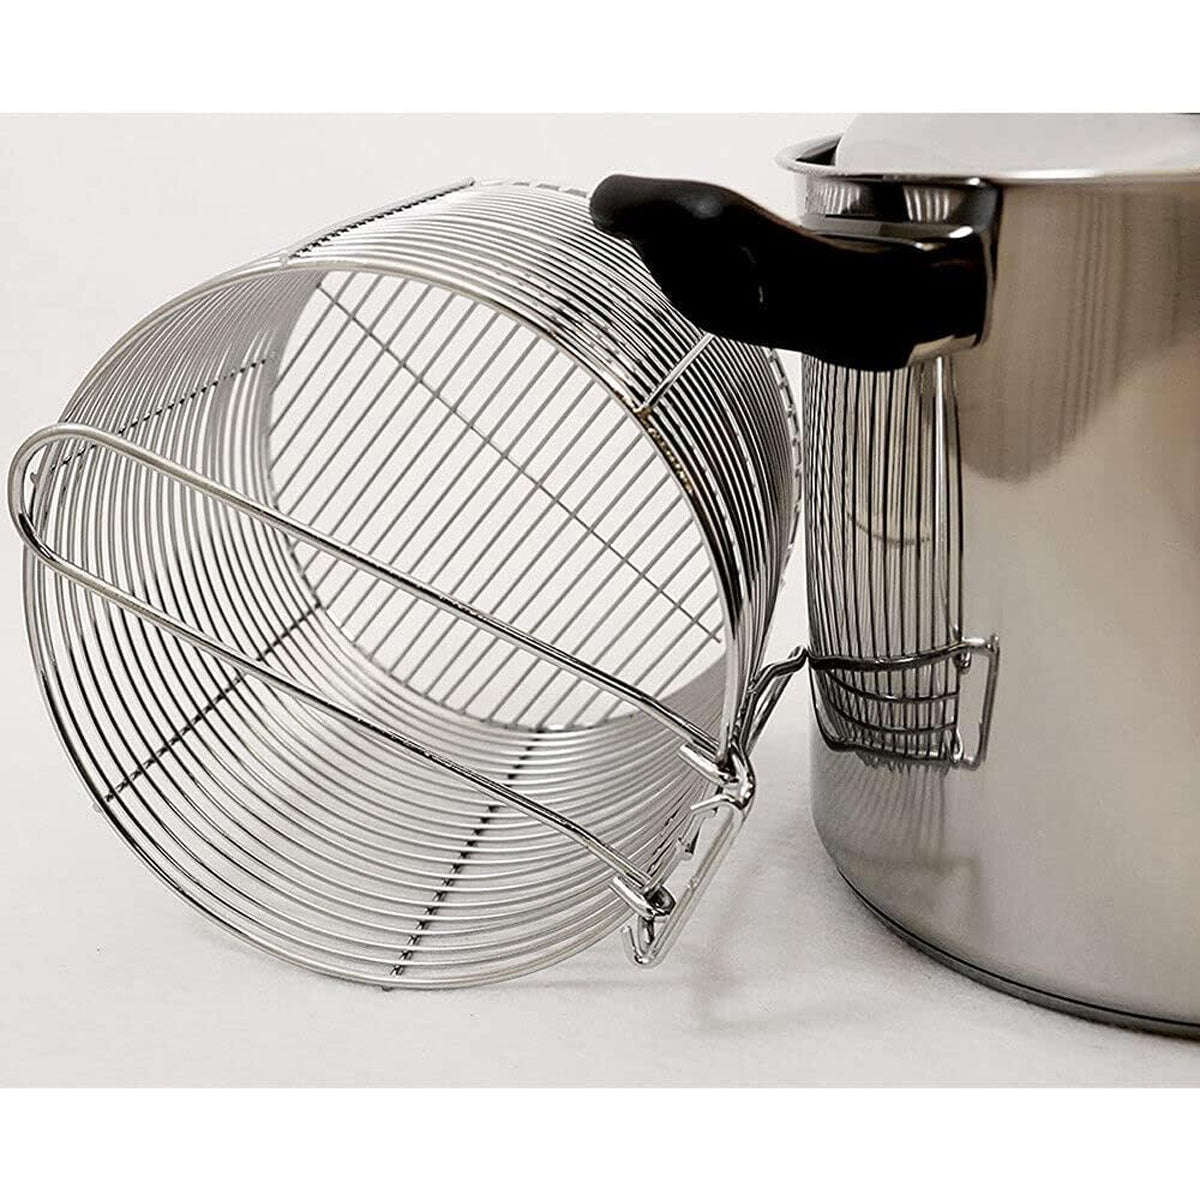 Vinod Stainless Steel Chip Pan With Robust Fryer Basket